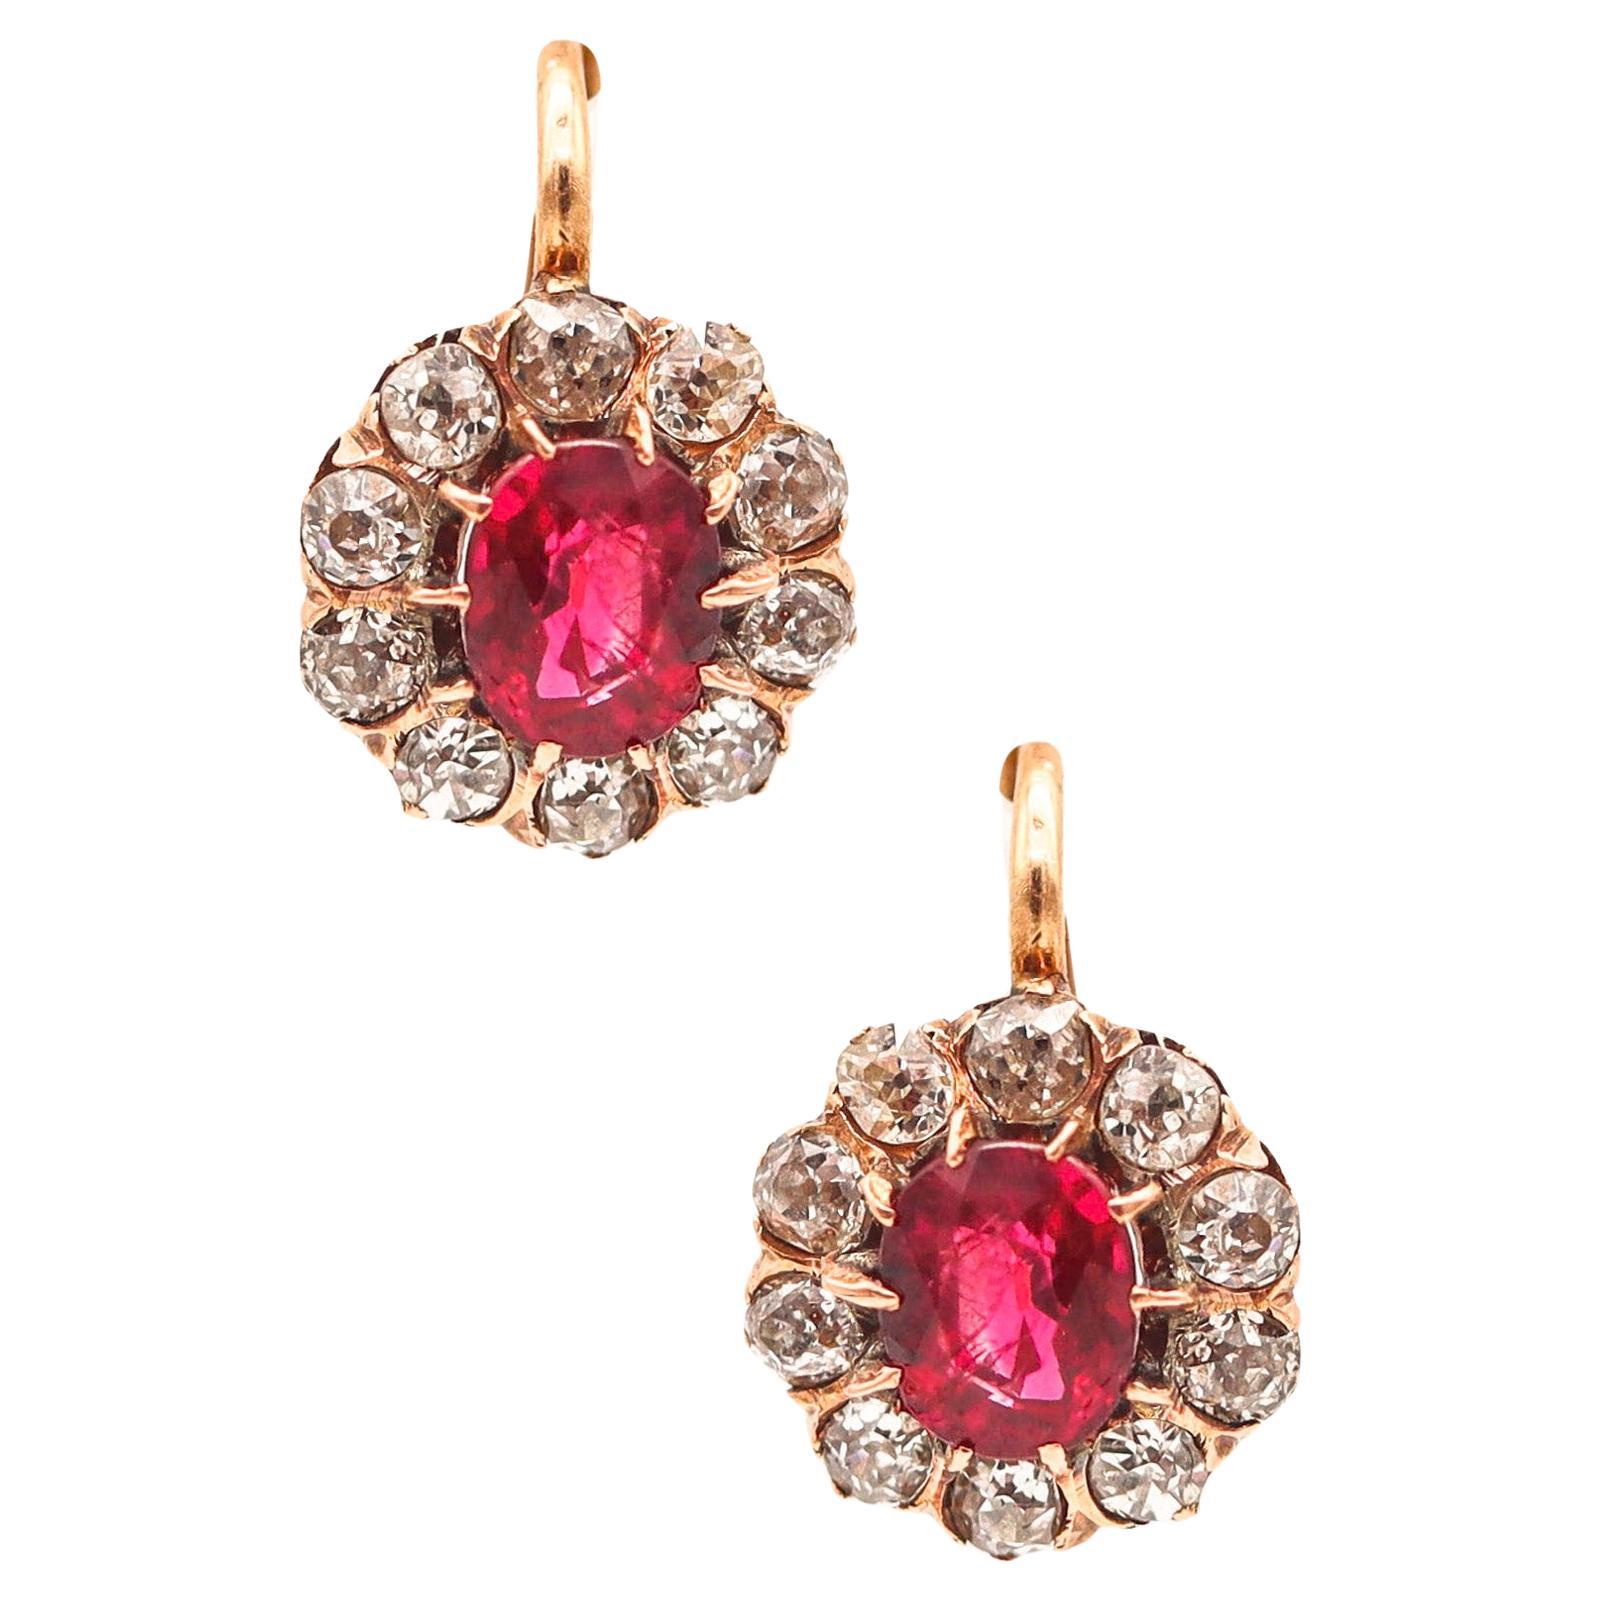 Edwardian 1905 Antique French Earrings 18Kt Gold With 3.54 Ctw Diamonds & Rubies For Sale